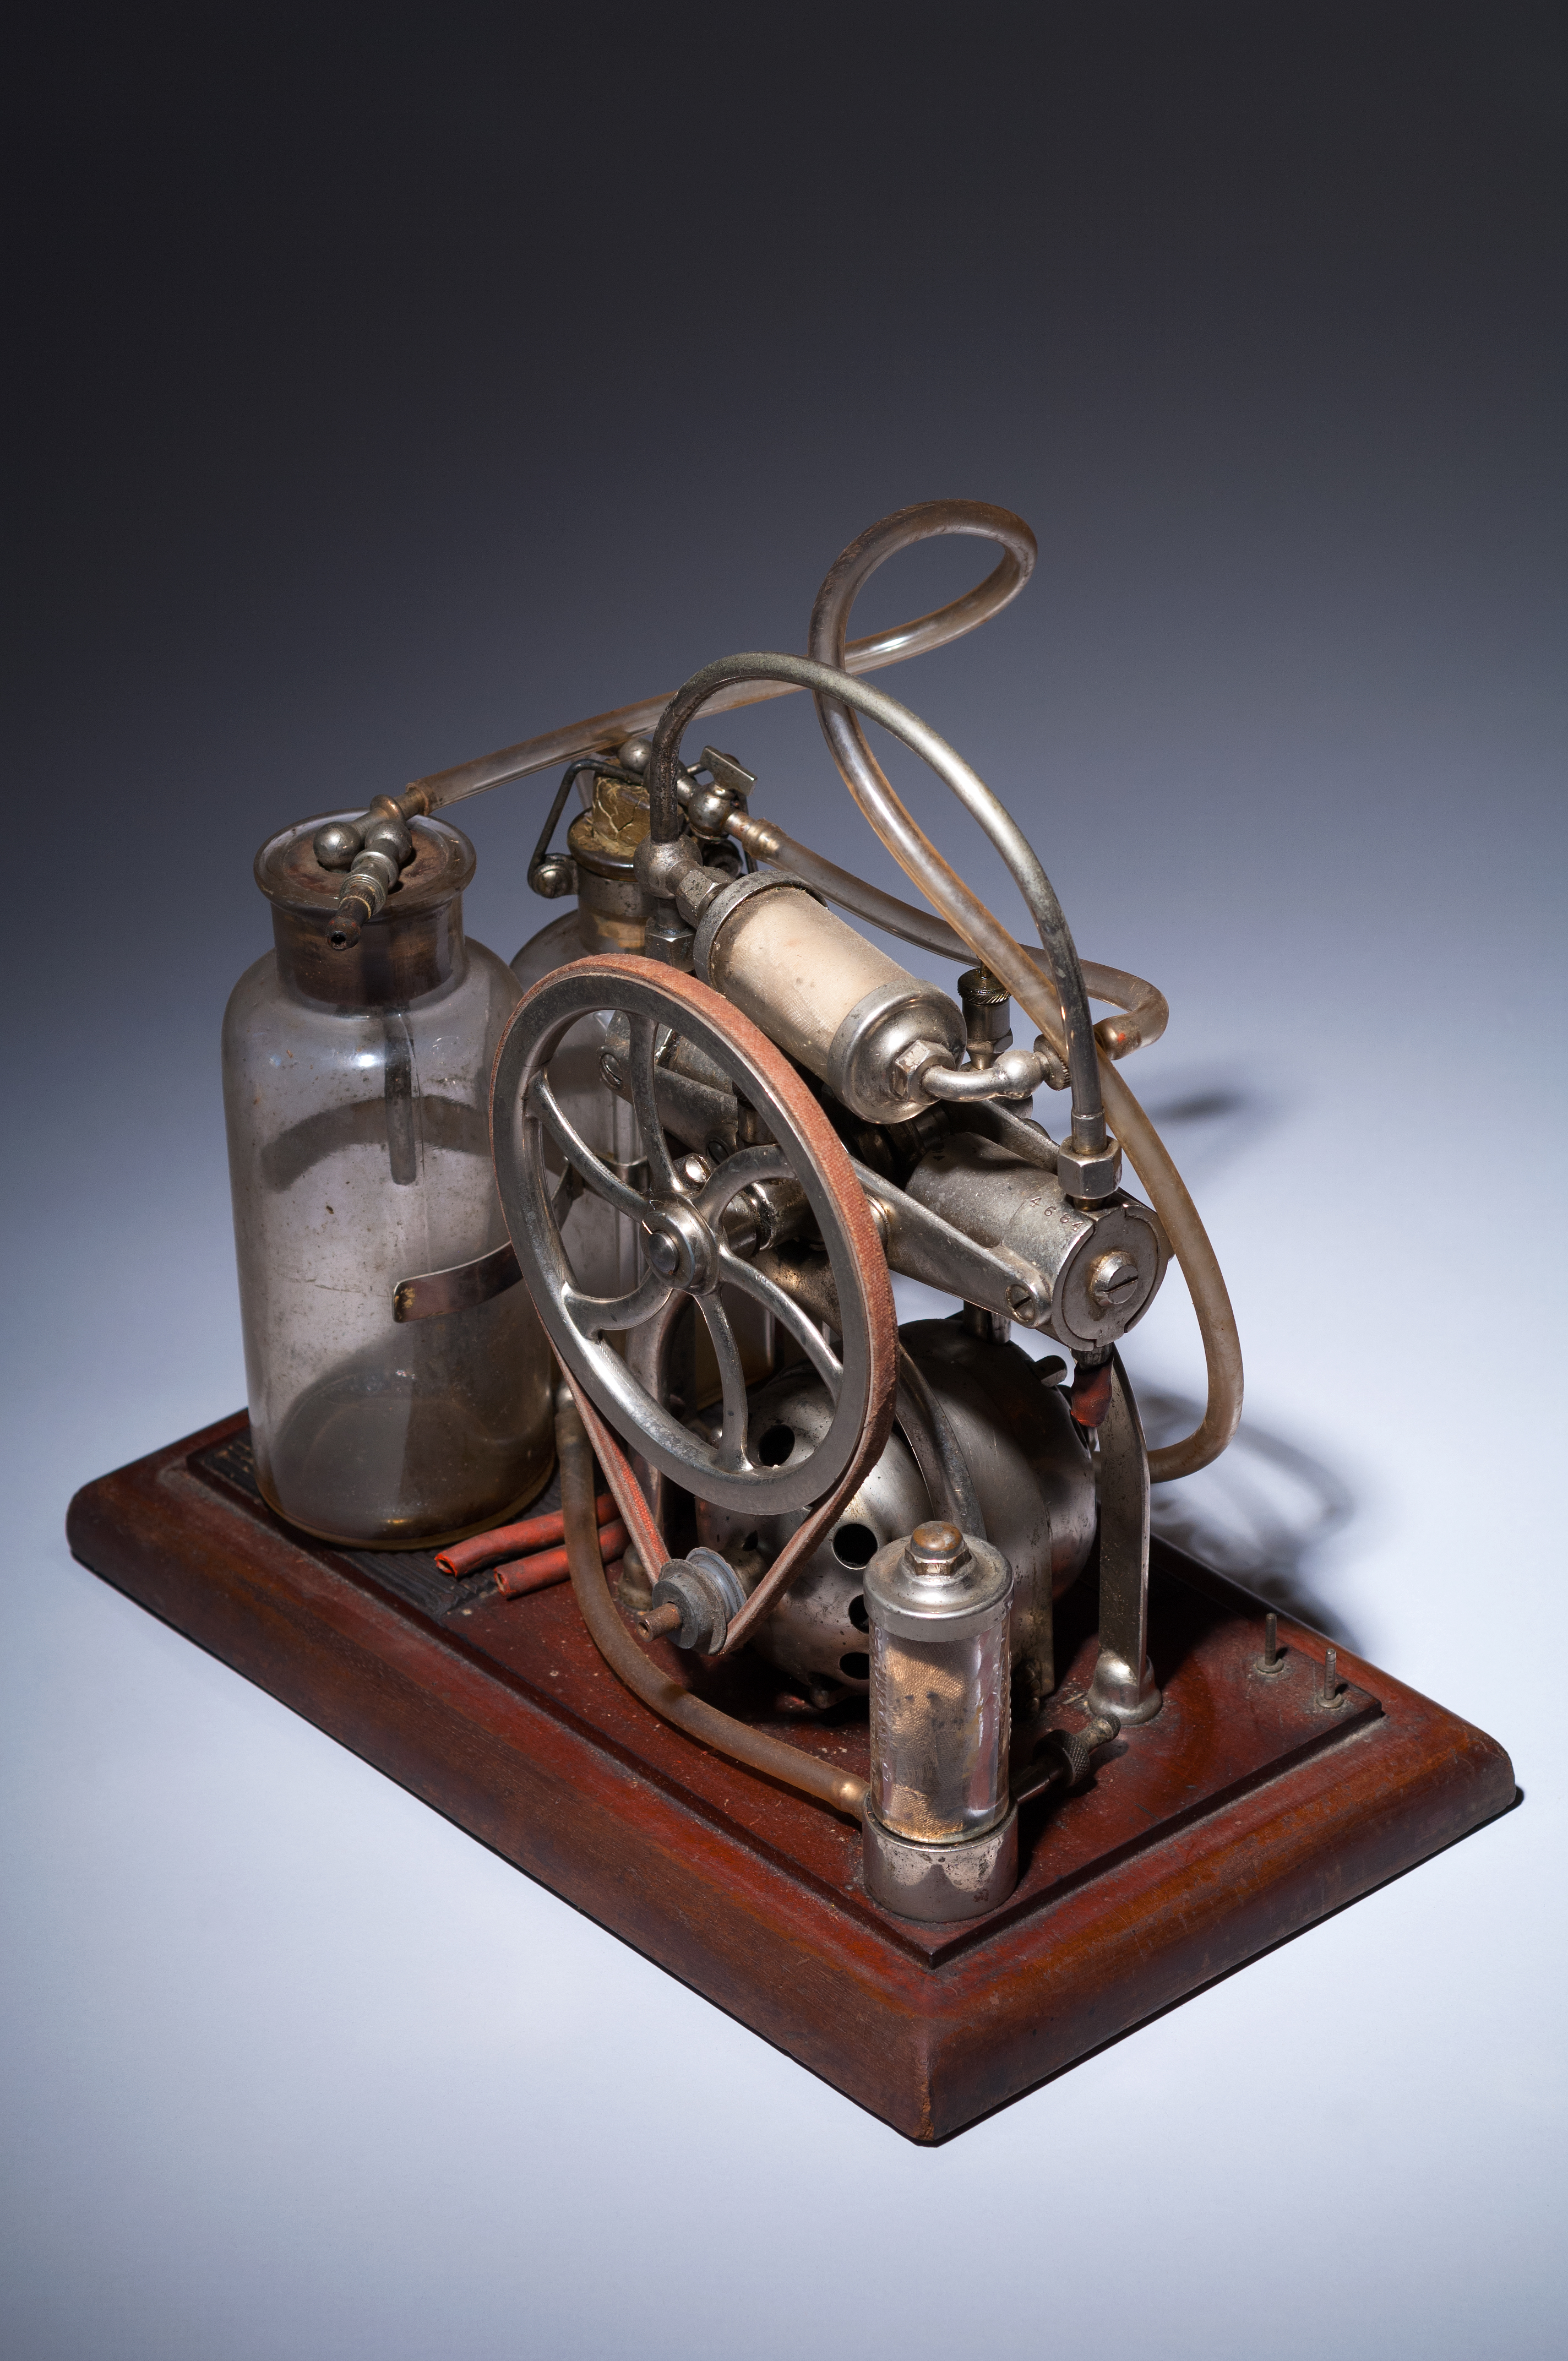 One of hundreds of items William Shelton, M’52, collected over the course of his career, this pump was used to empty the contents of the GI tract.